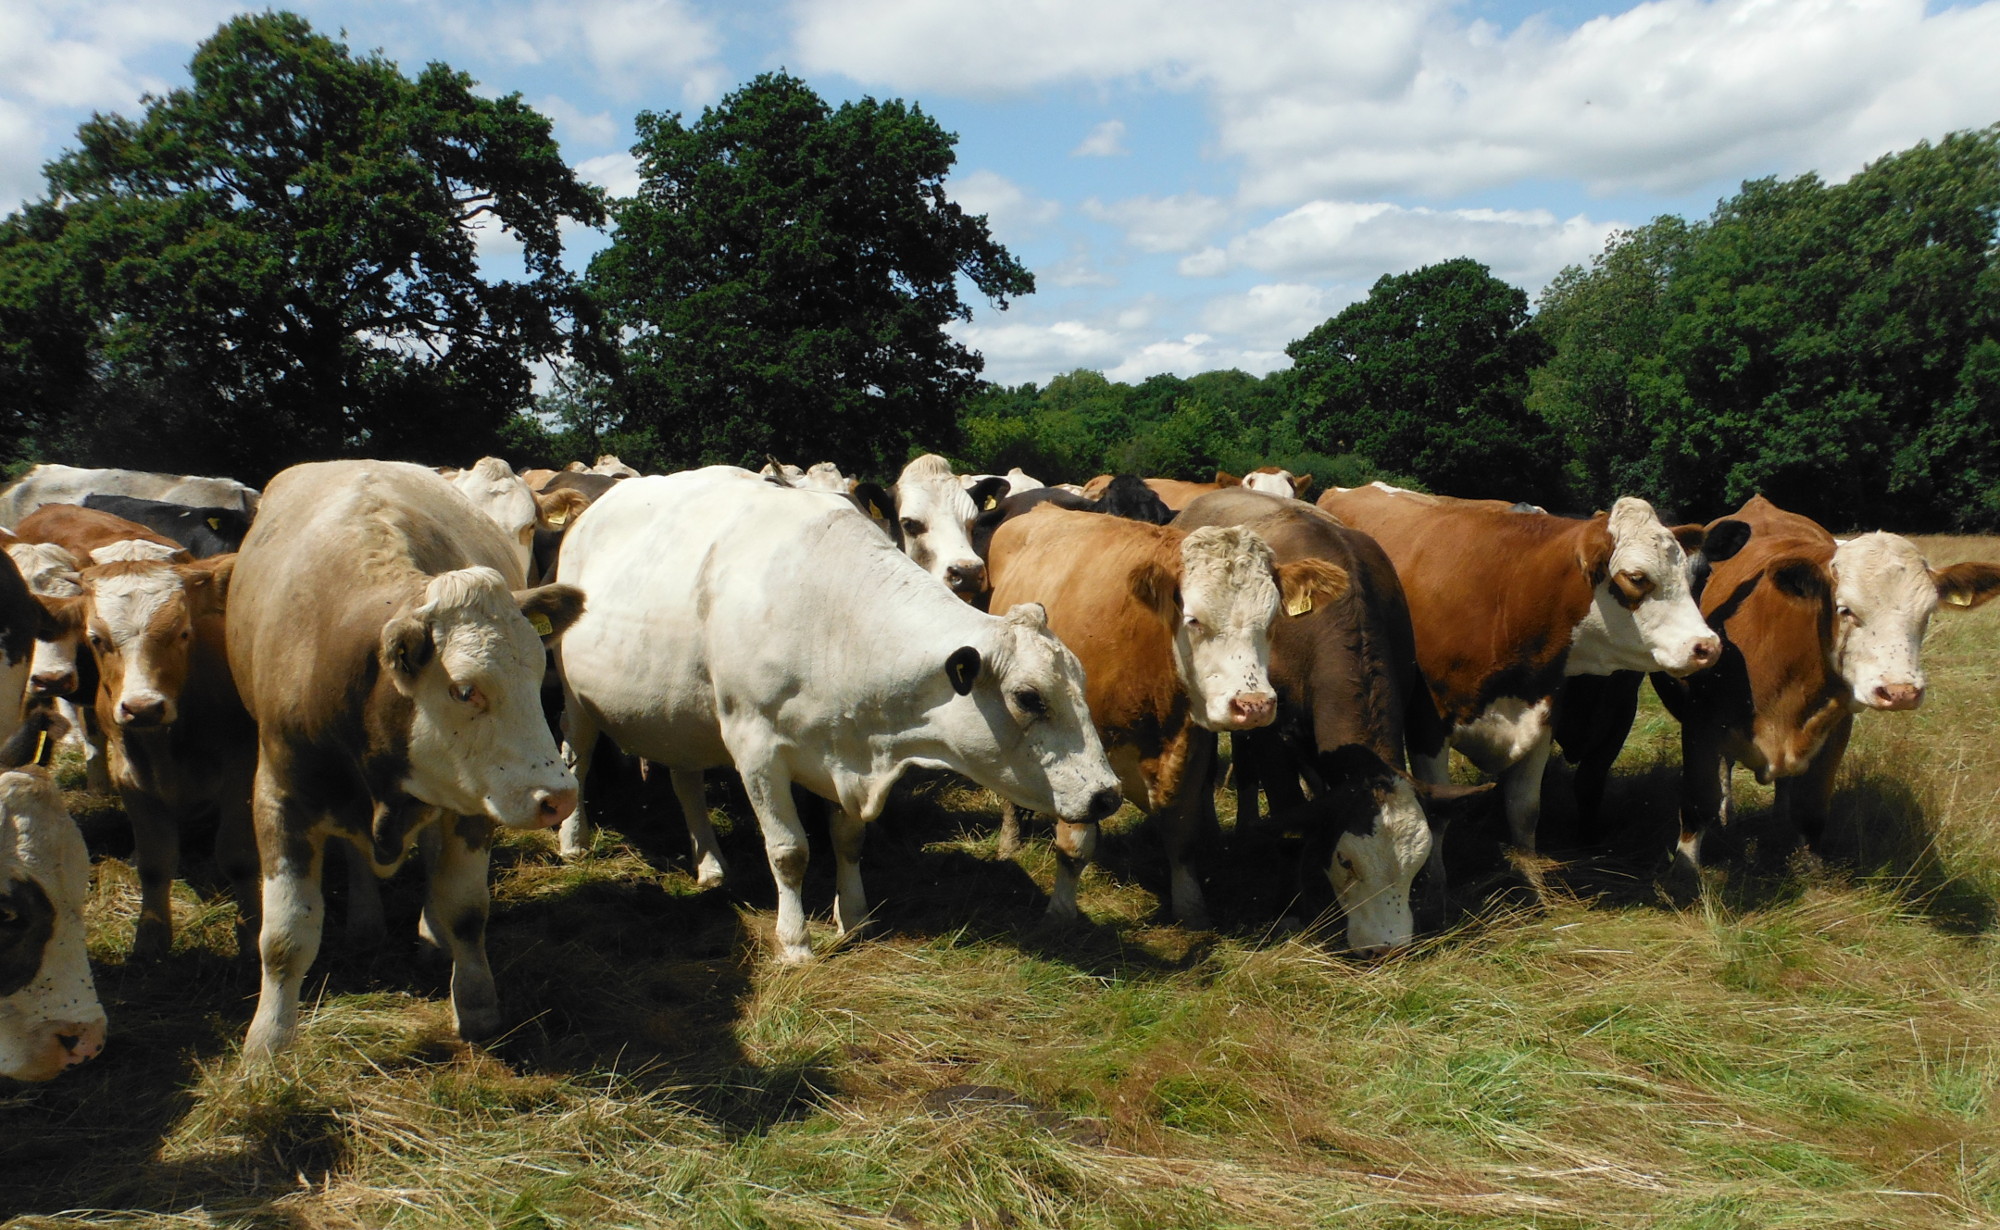 Cows in a field crowding round